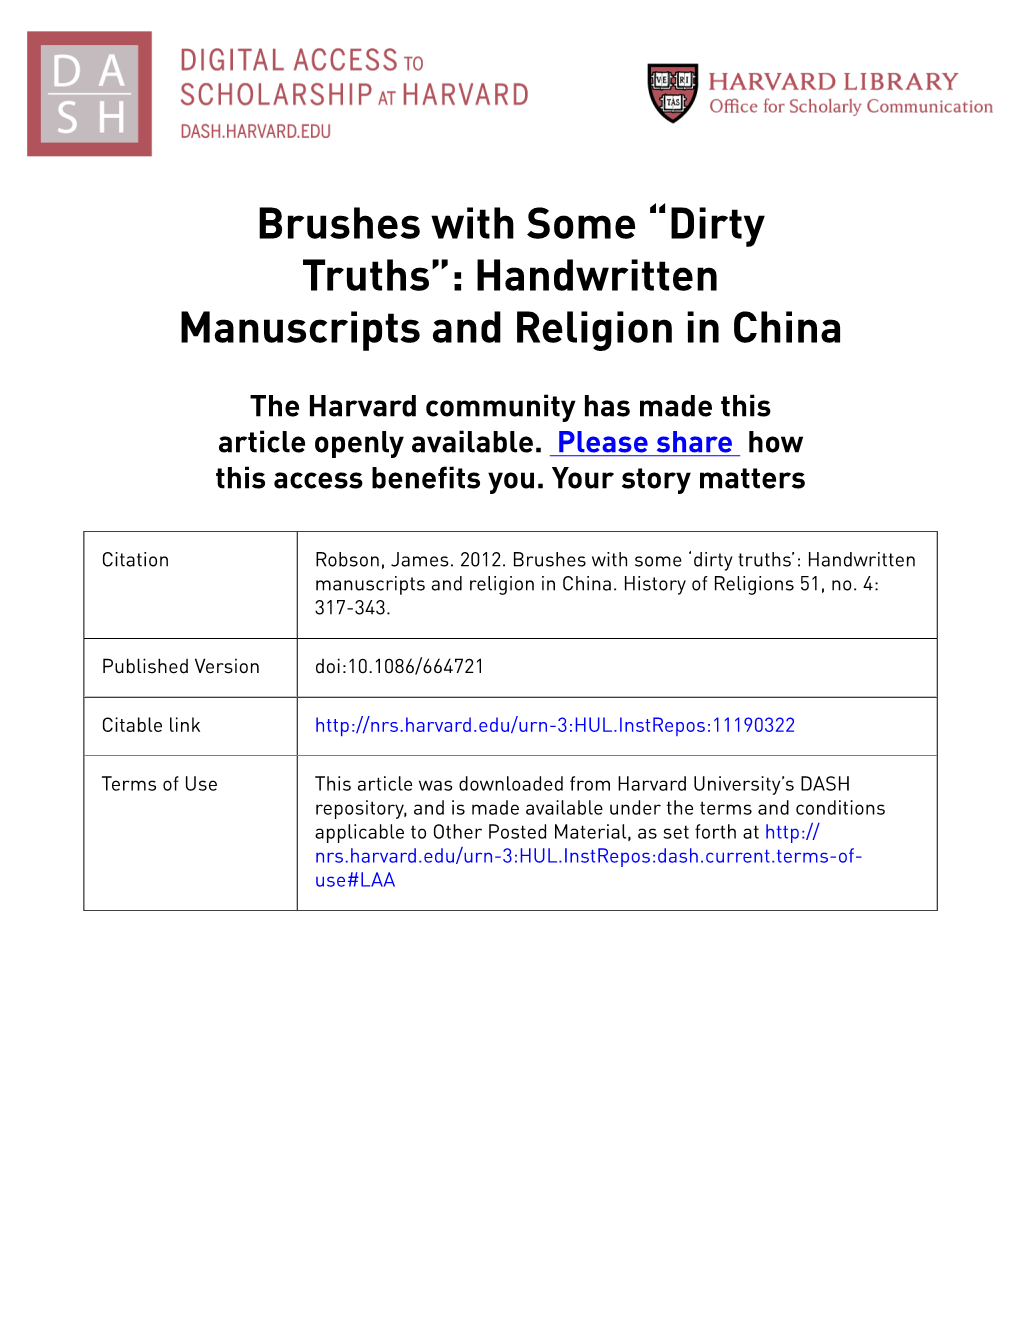 Brushes with Some Dirty Truths: Handwritten Manuscripts And